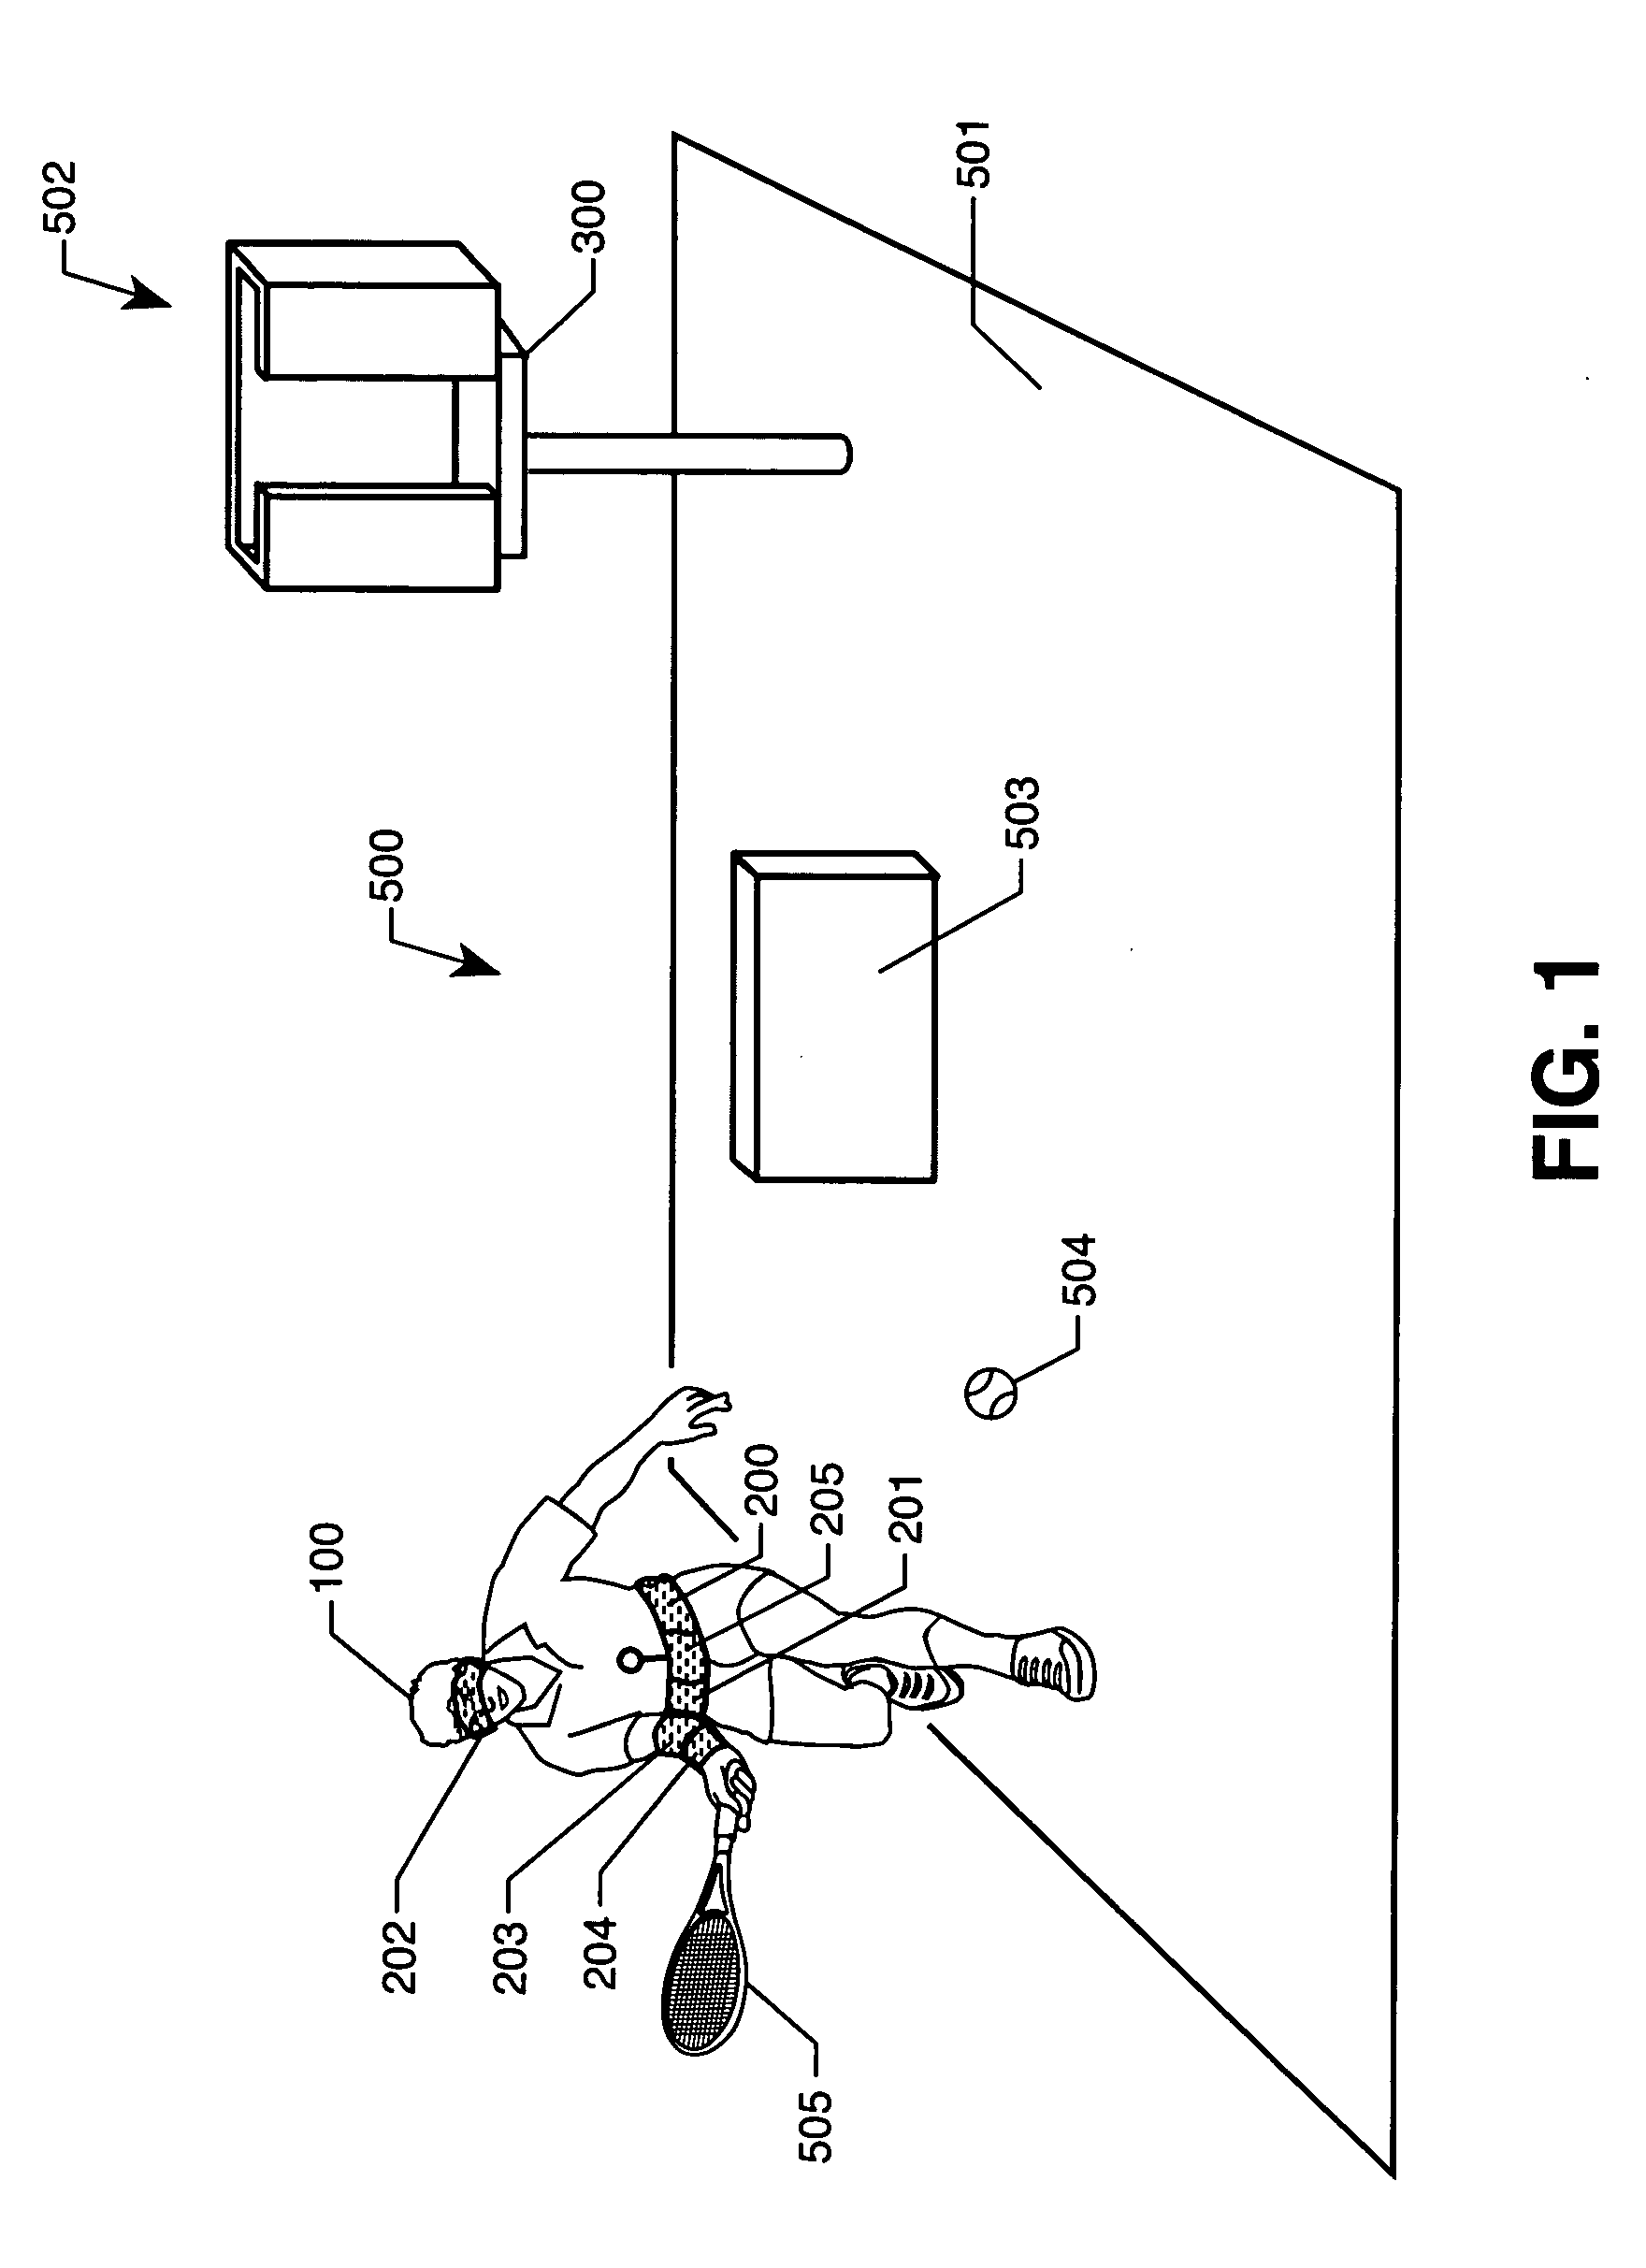 Method and apparatus for performance optimization through physical perturbation of task elements